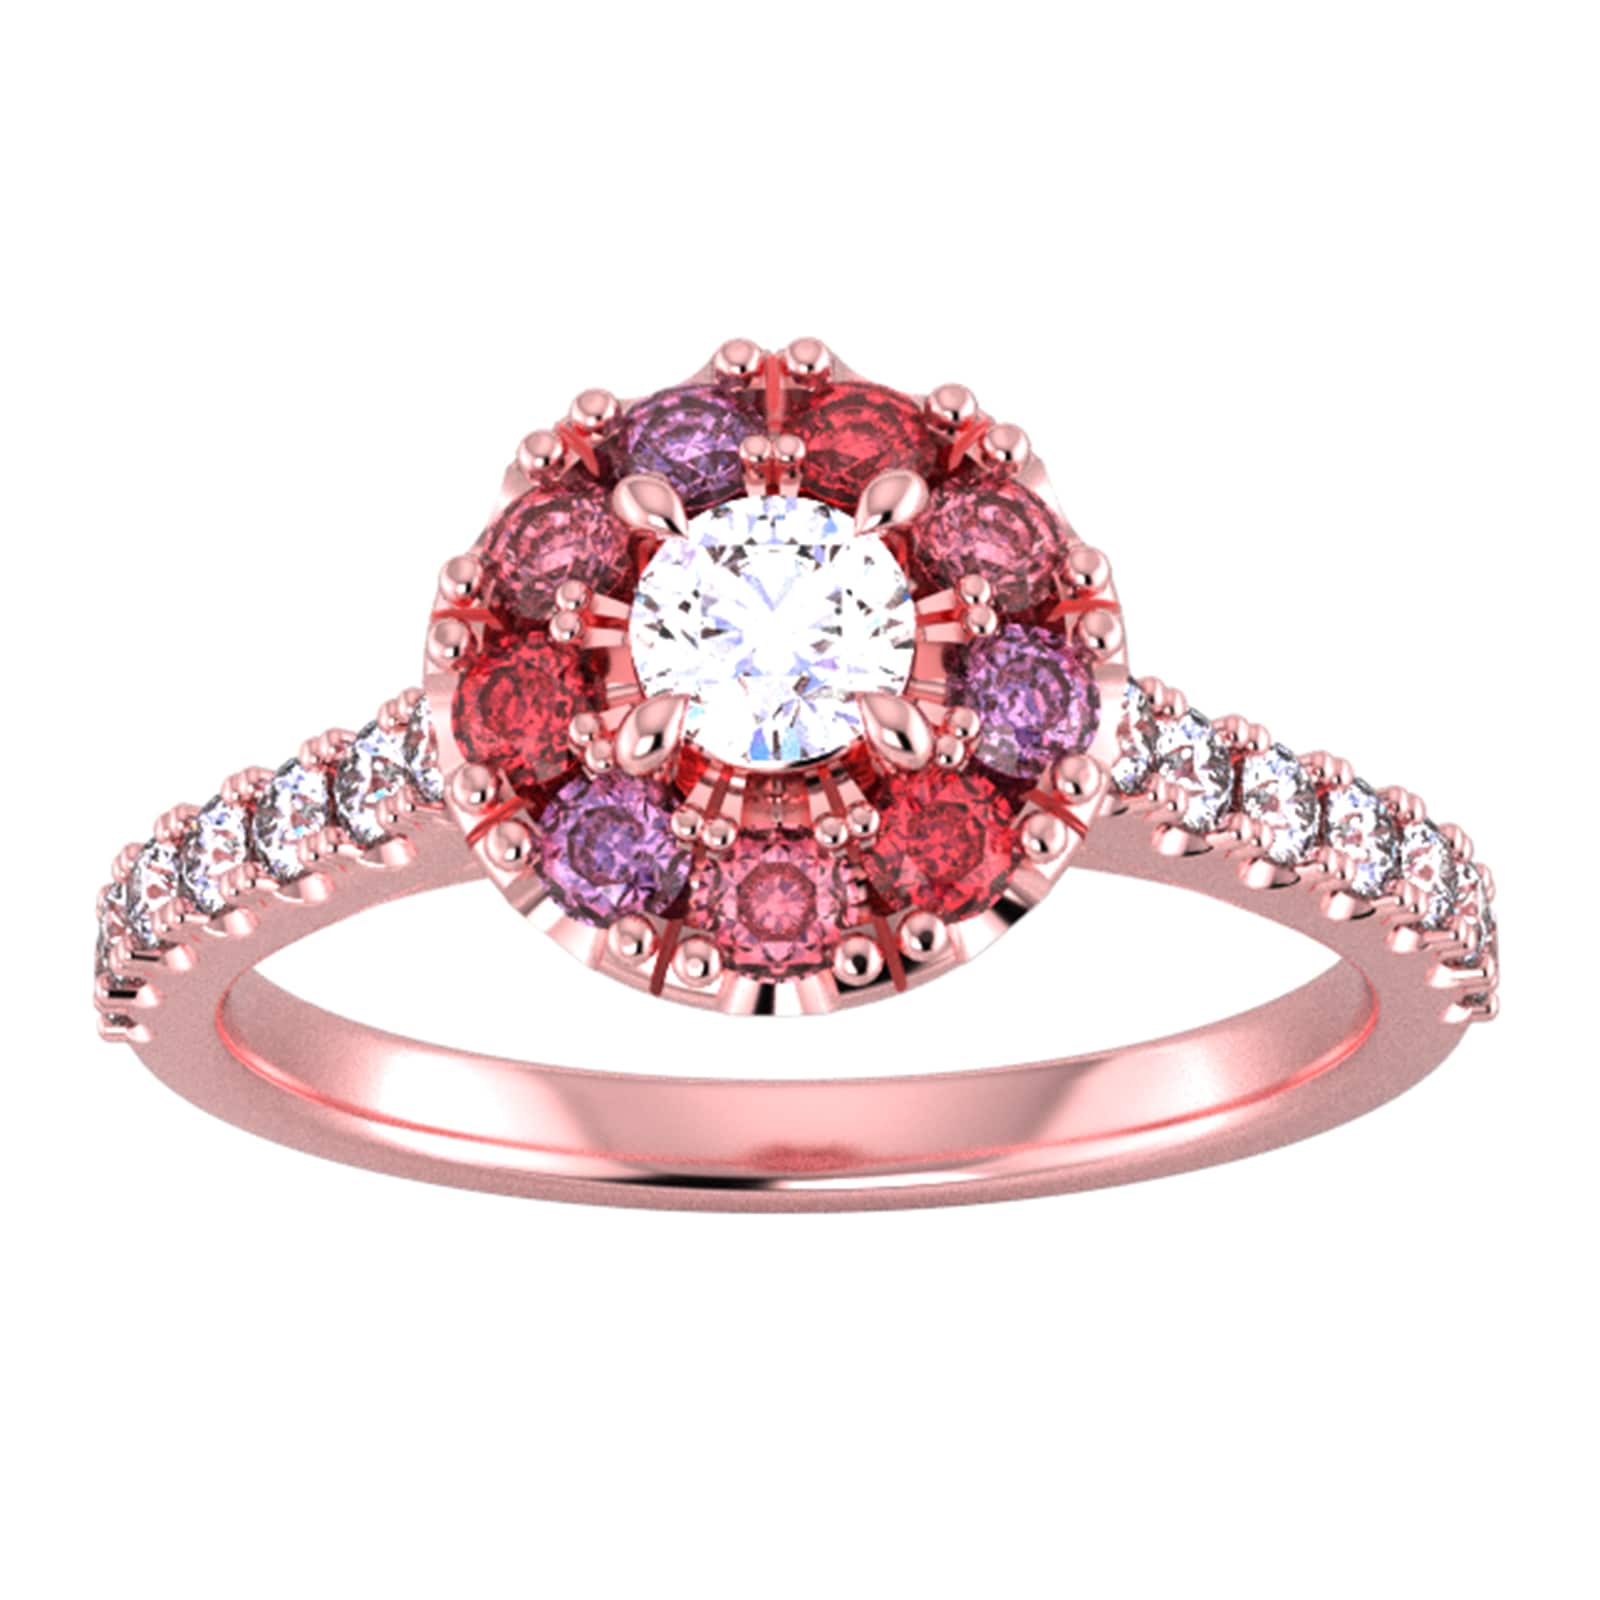 9ct Rose Gold Diamond & Red, Pink, Purple Sapphire Halo Ring - Ring Size O